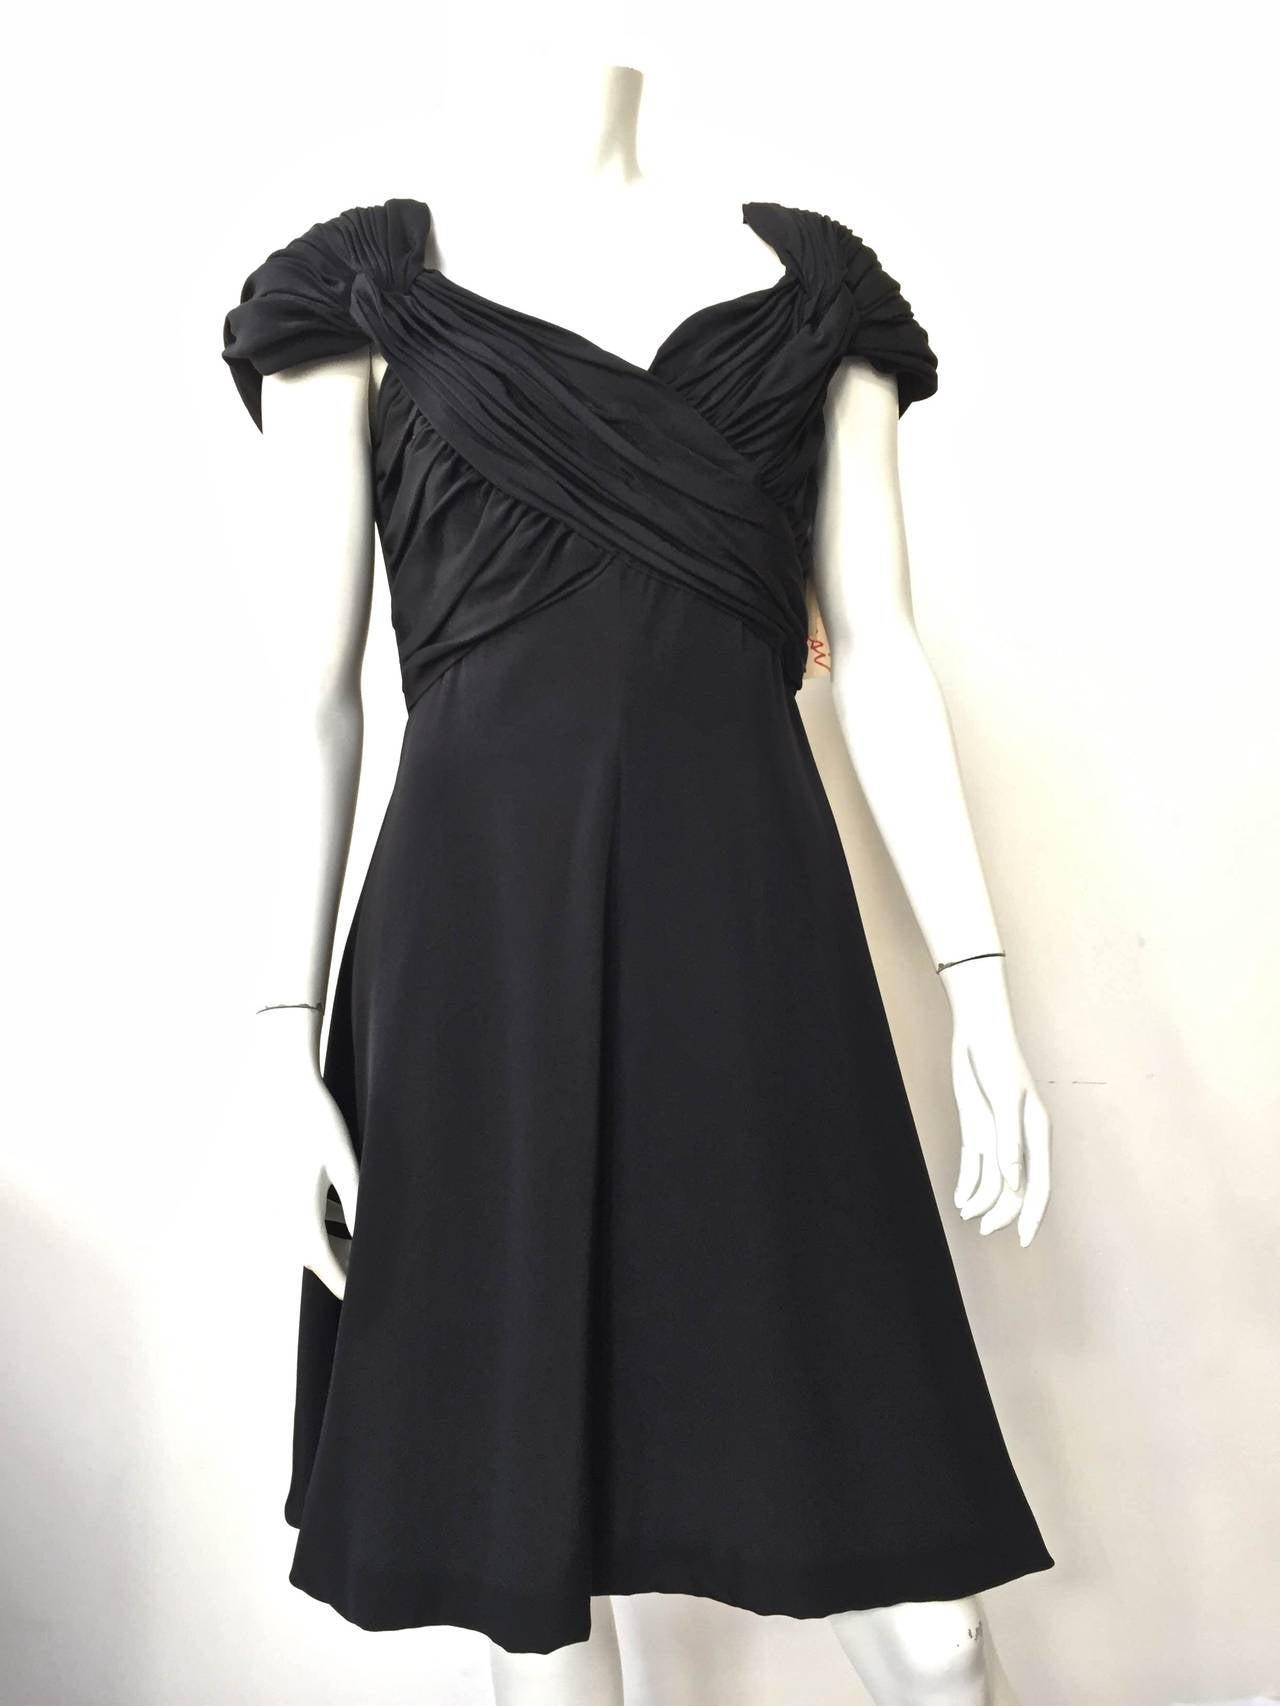 Scaasi 80s silk little black dress still with original price tag of $2,180 and a size 12 but fits like a size 6 today. Please see measurements below.  Made in the USA. This is one gorgeous & sexy silk dress, it is timeless but what you expect from